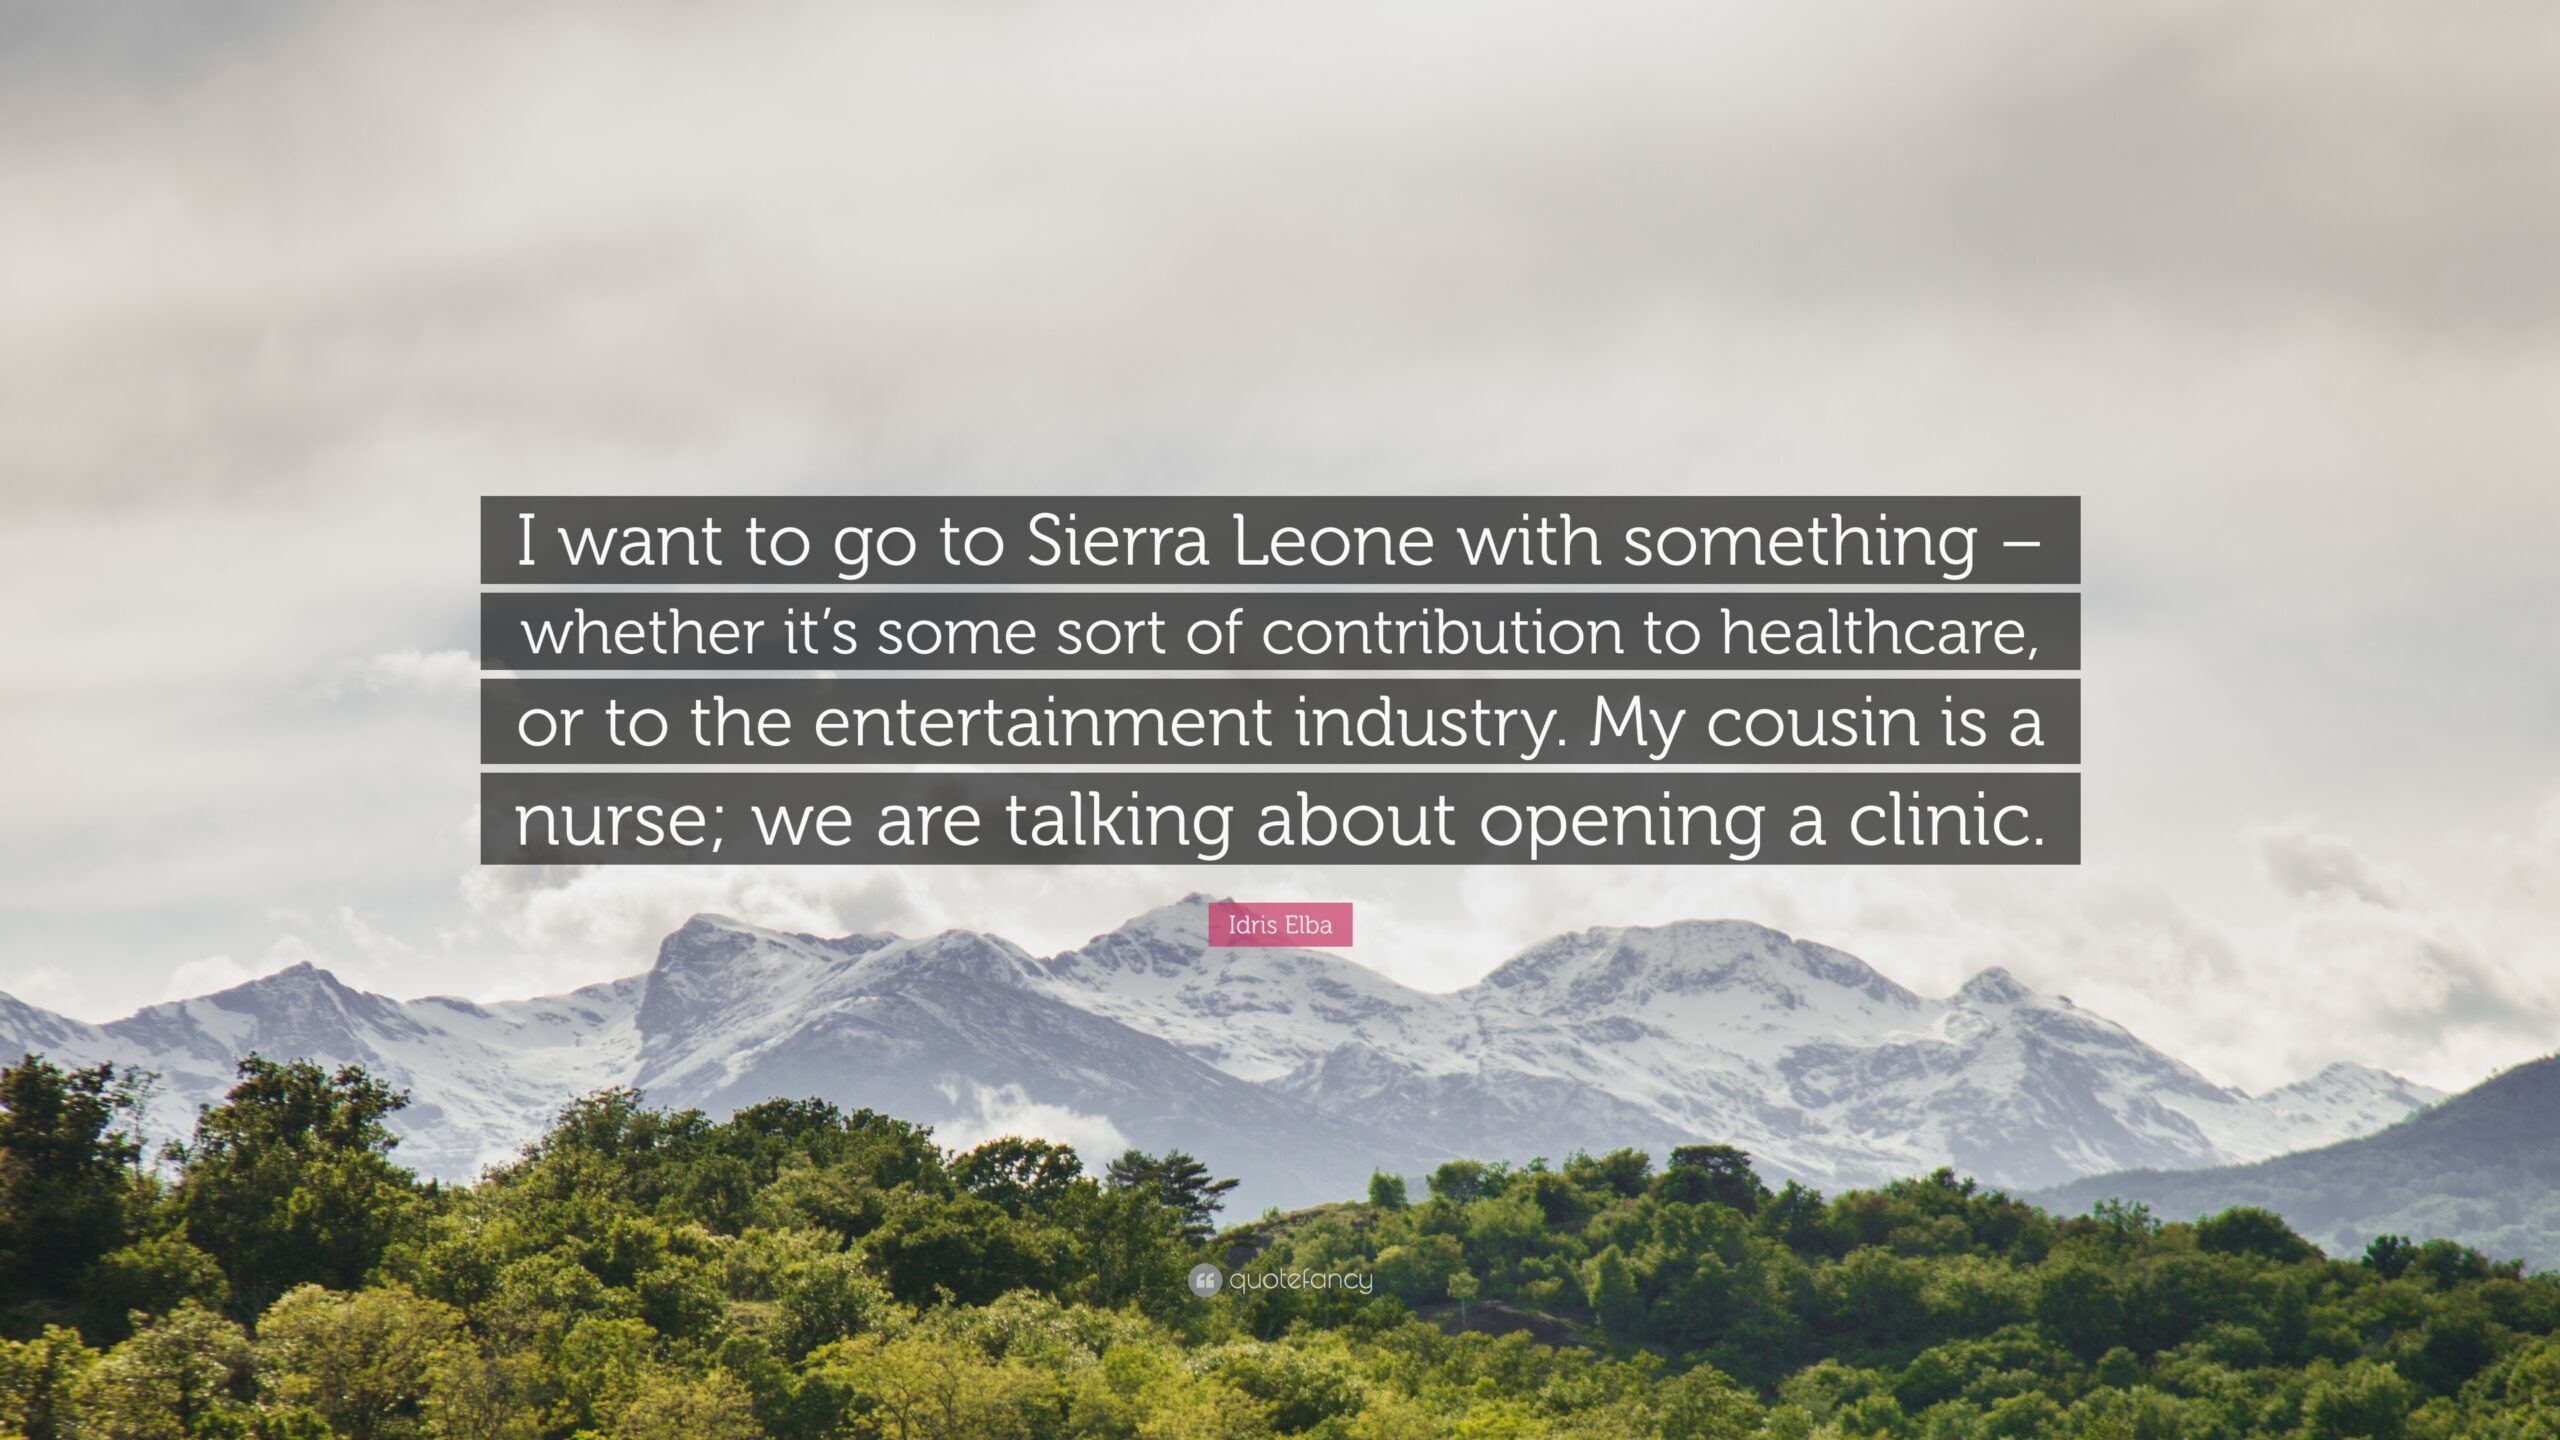 Idris Elba Quote “I want to go to Sierra Leone with something